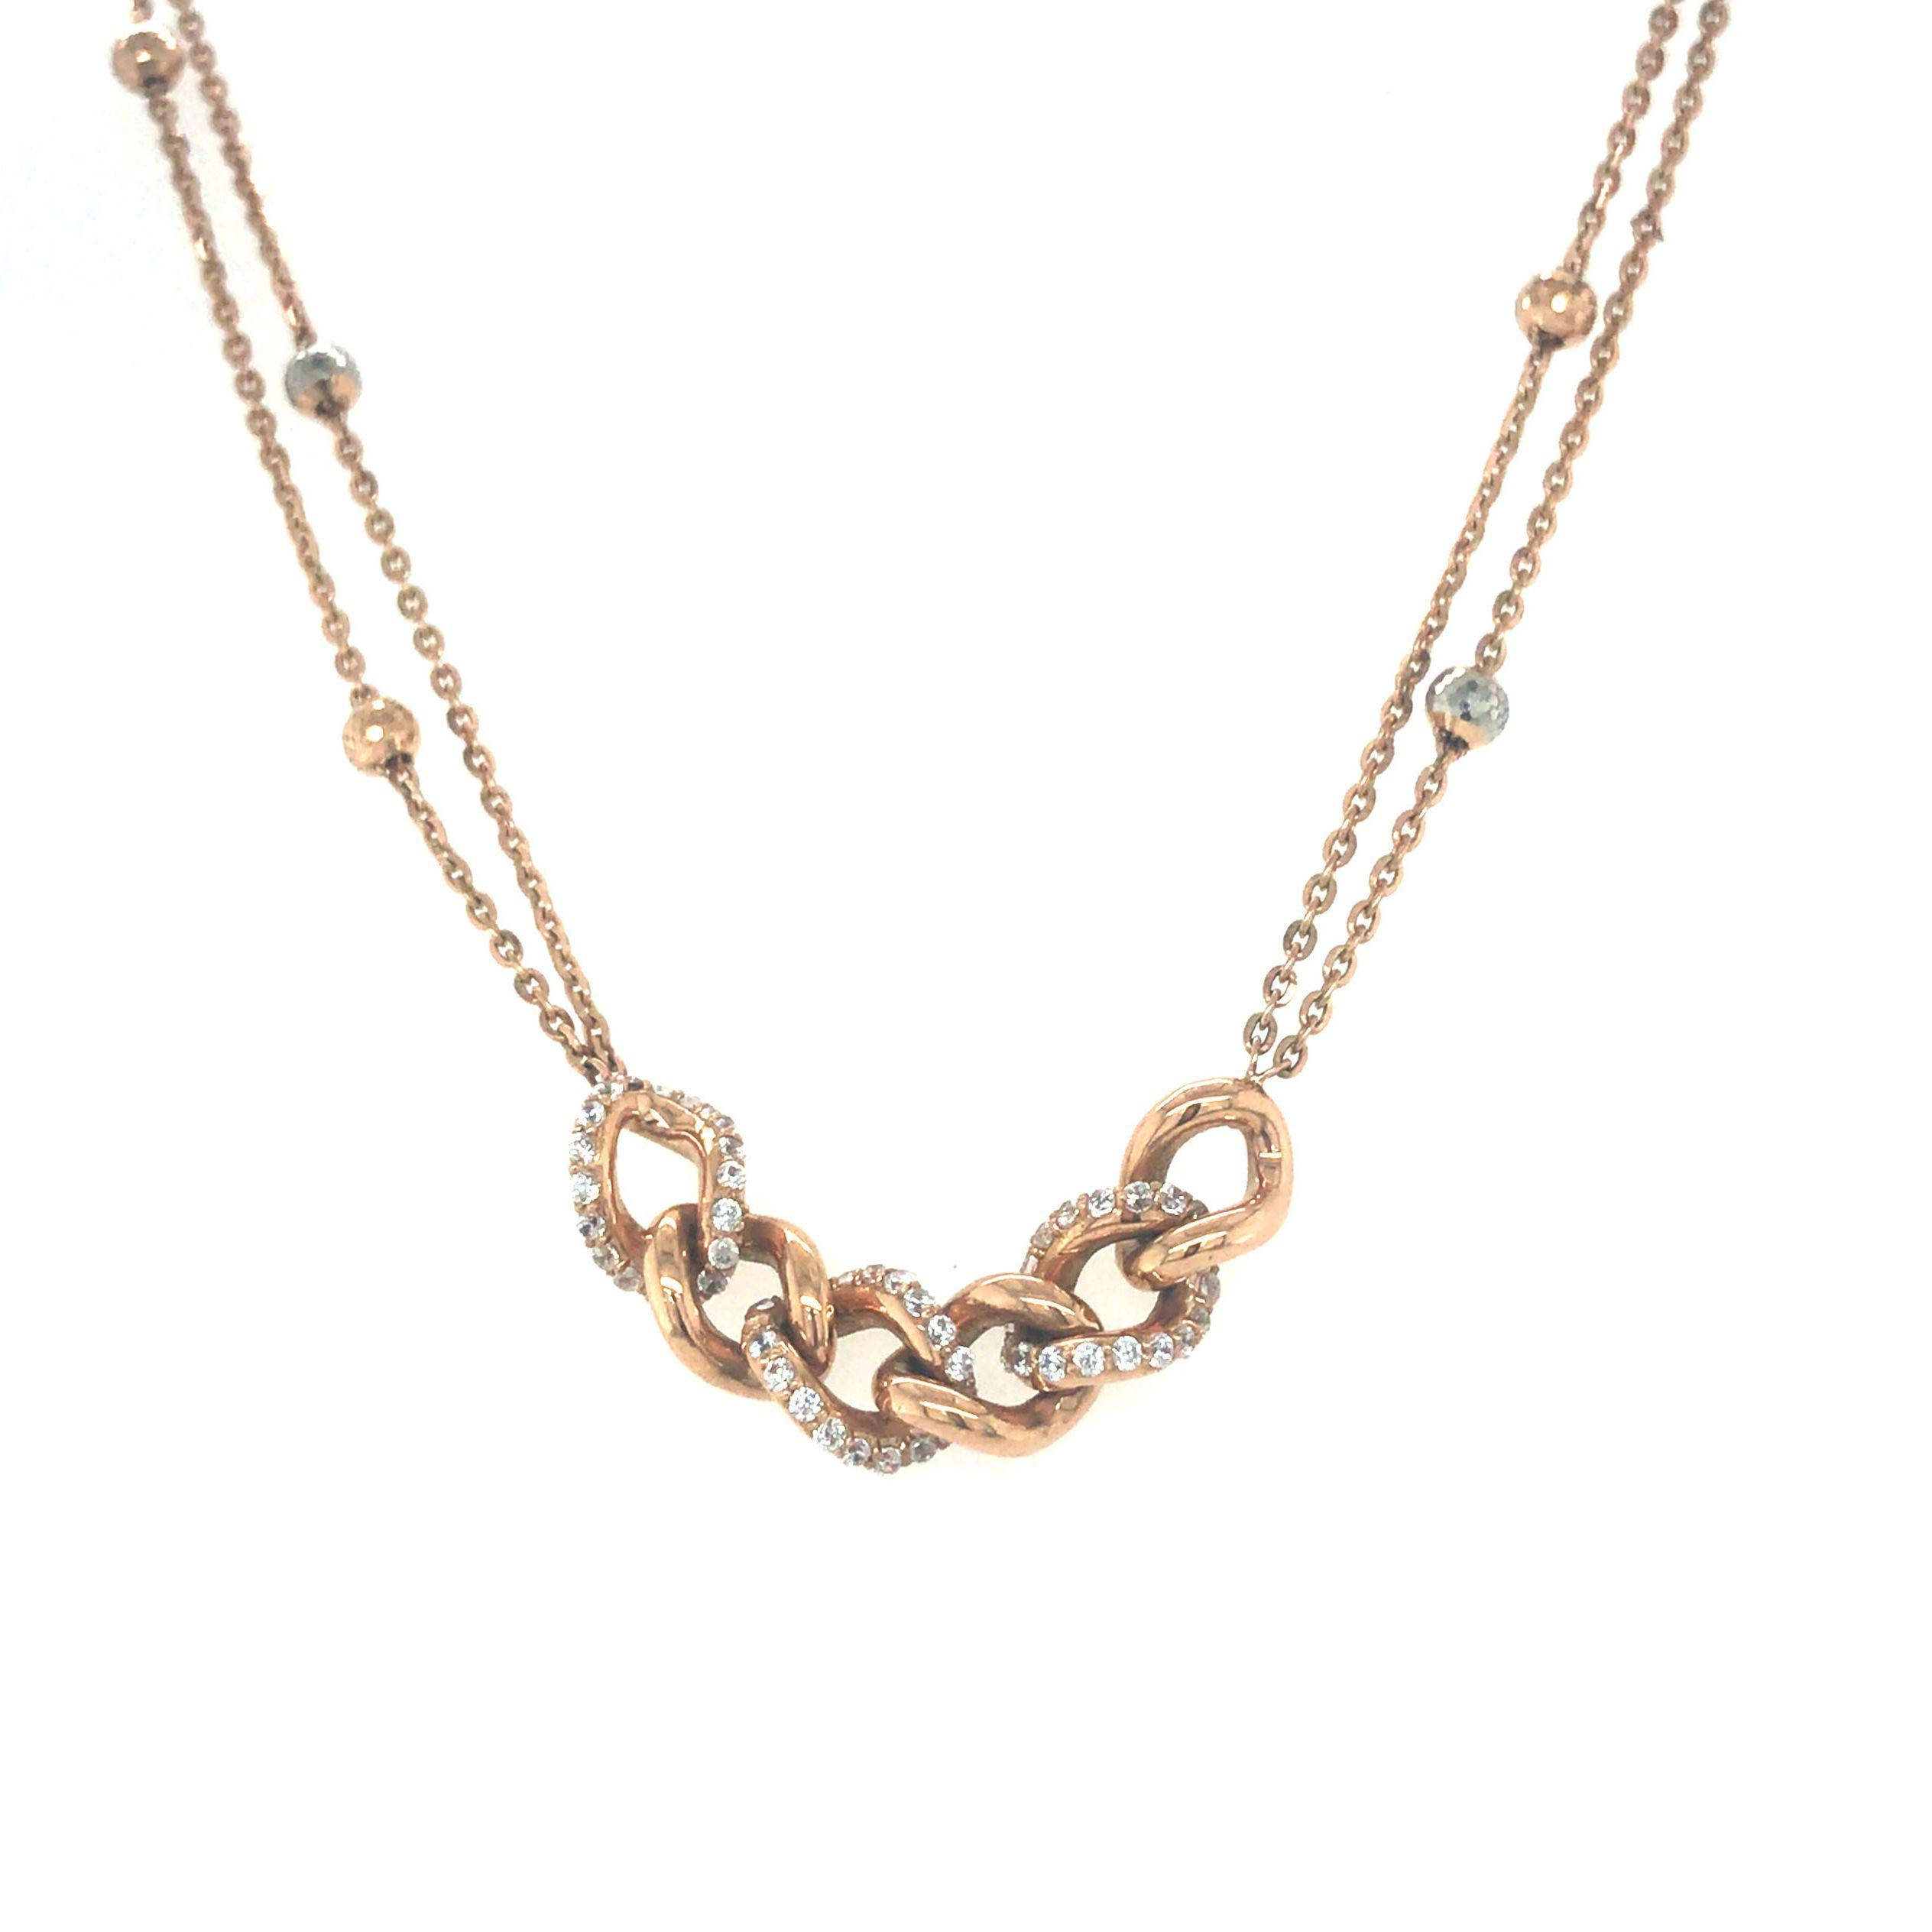 59th Snake Gold Filled Chain Necklace – miramira New York